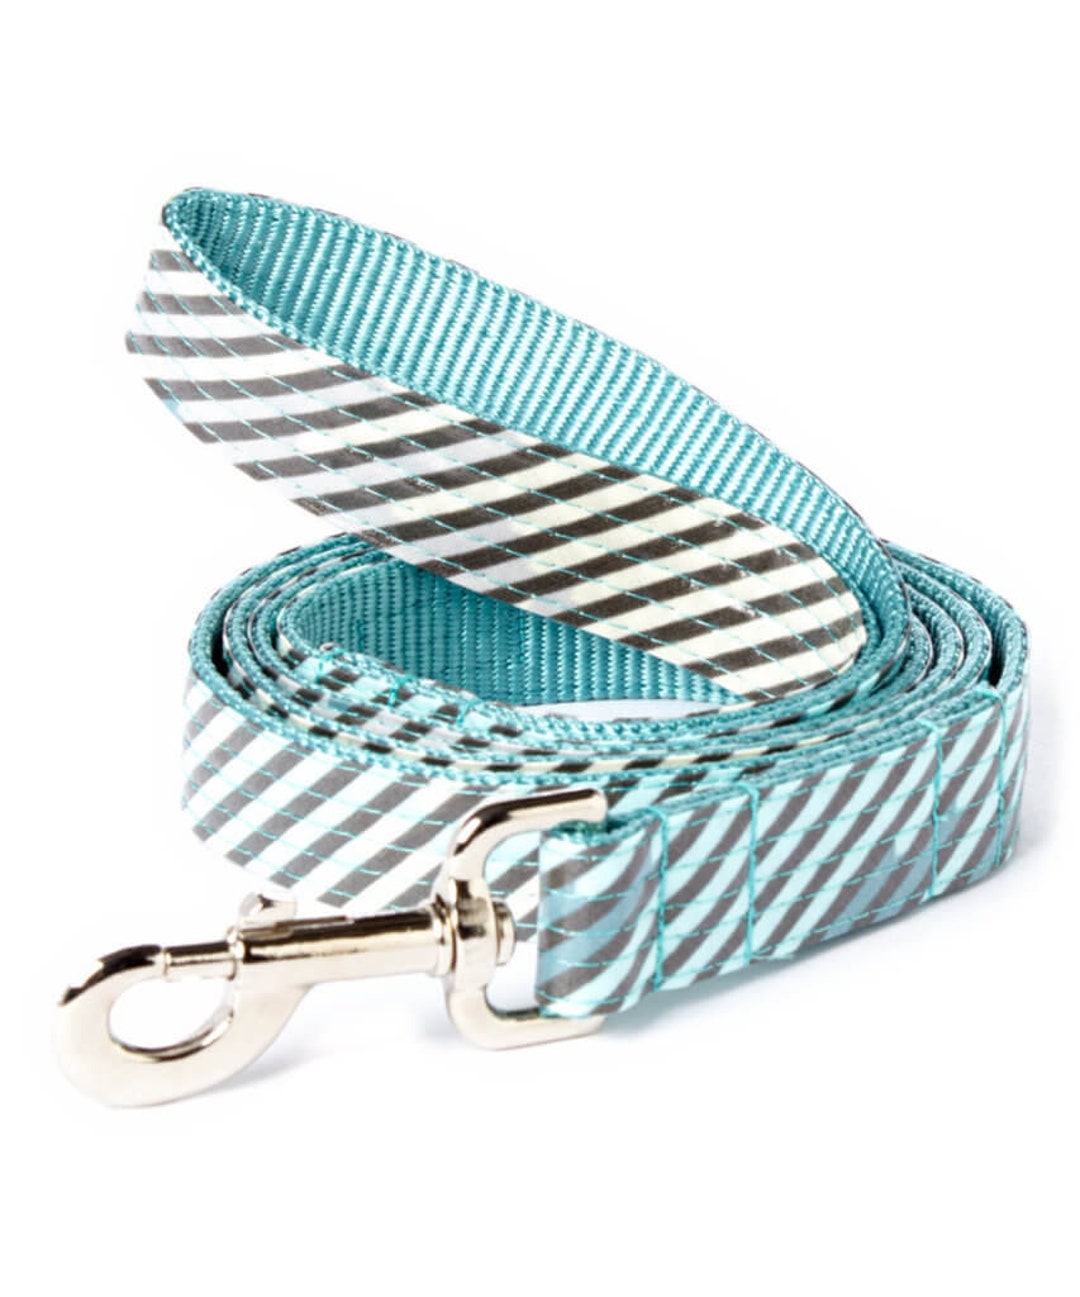 15 Styles LAMINATED COTTON Dog Leash Choose Length and Width - Etsy